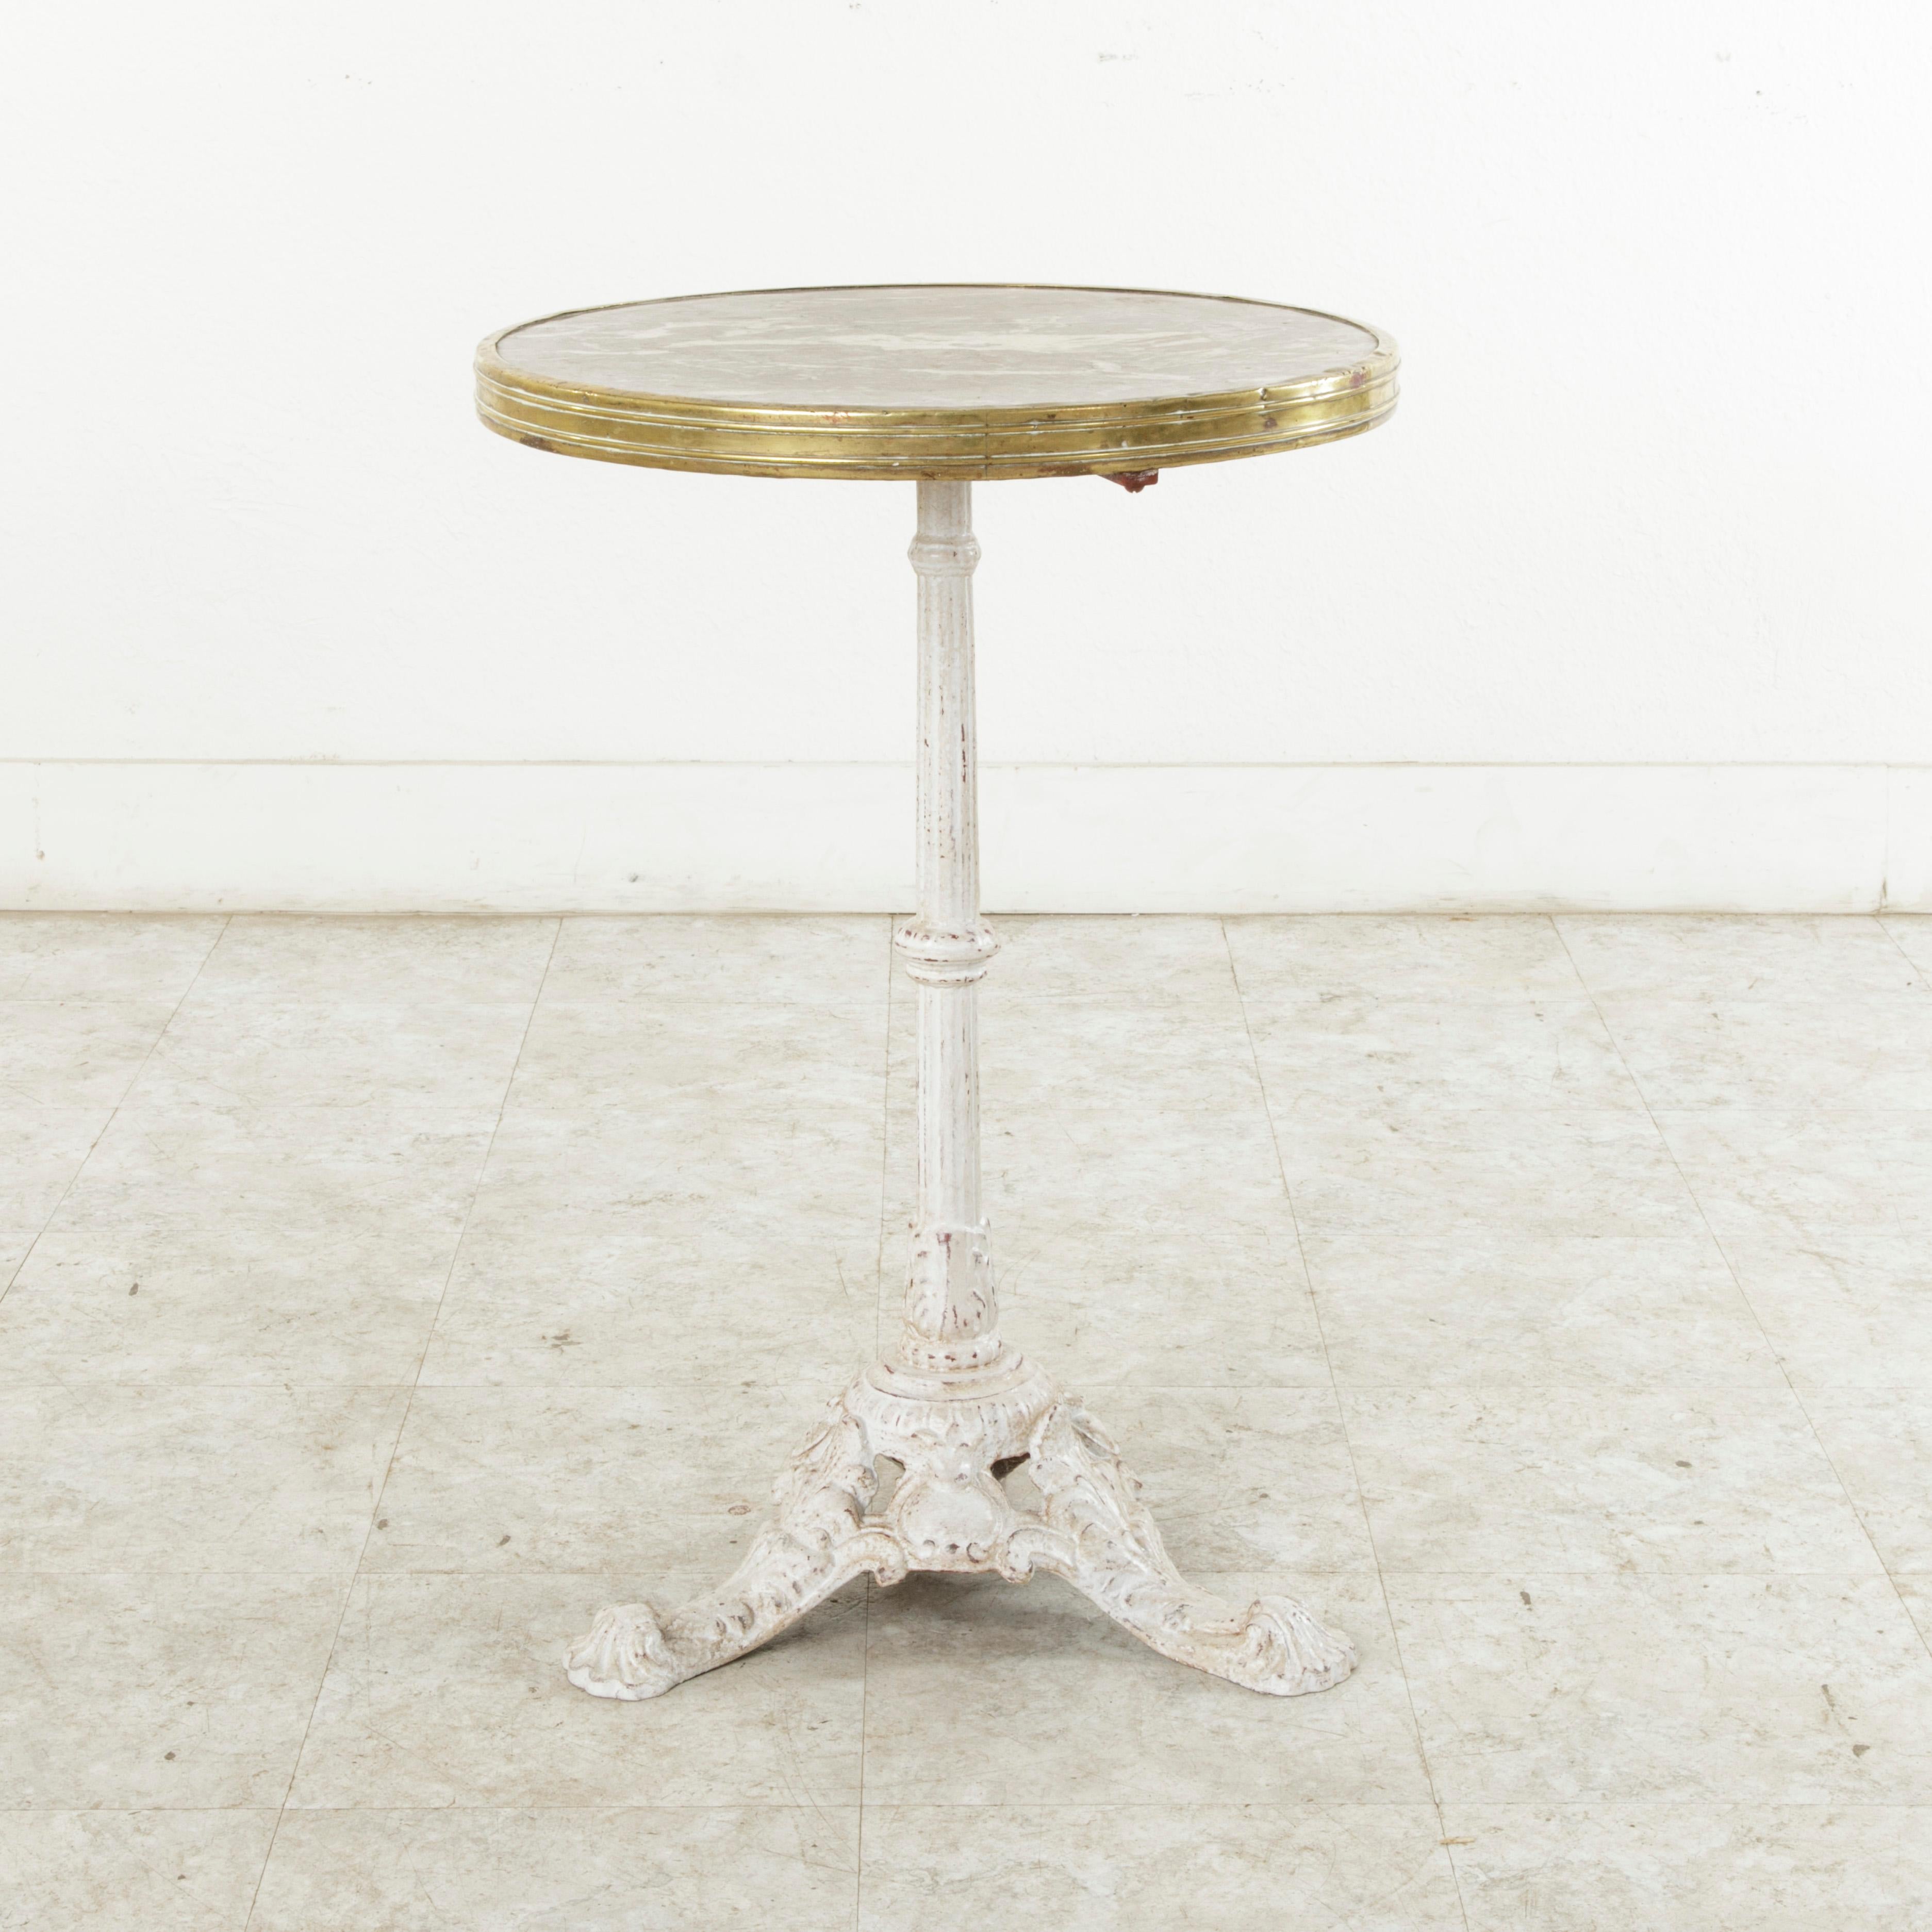 This French cast iron bistro table from the turn of the twentieth century features a grey and rose colored marble top with white veining surrounded by a brass rim. Its top rests on a central pillar supported by a tripod base. The painted iron base